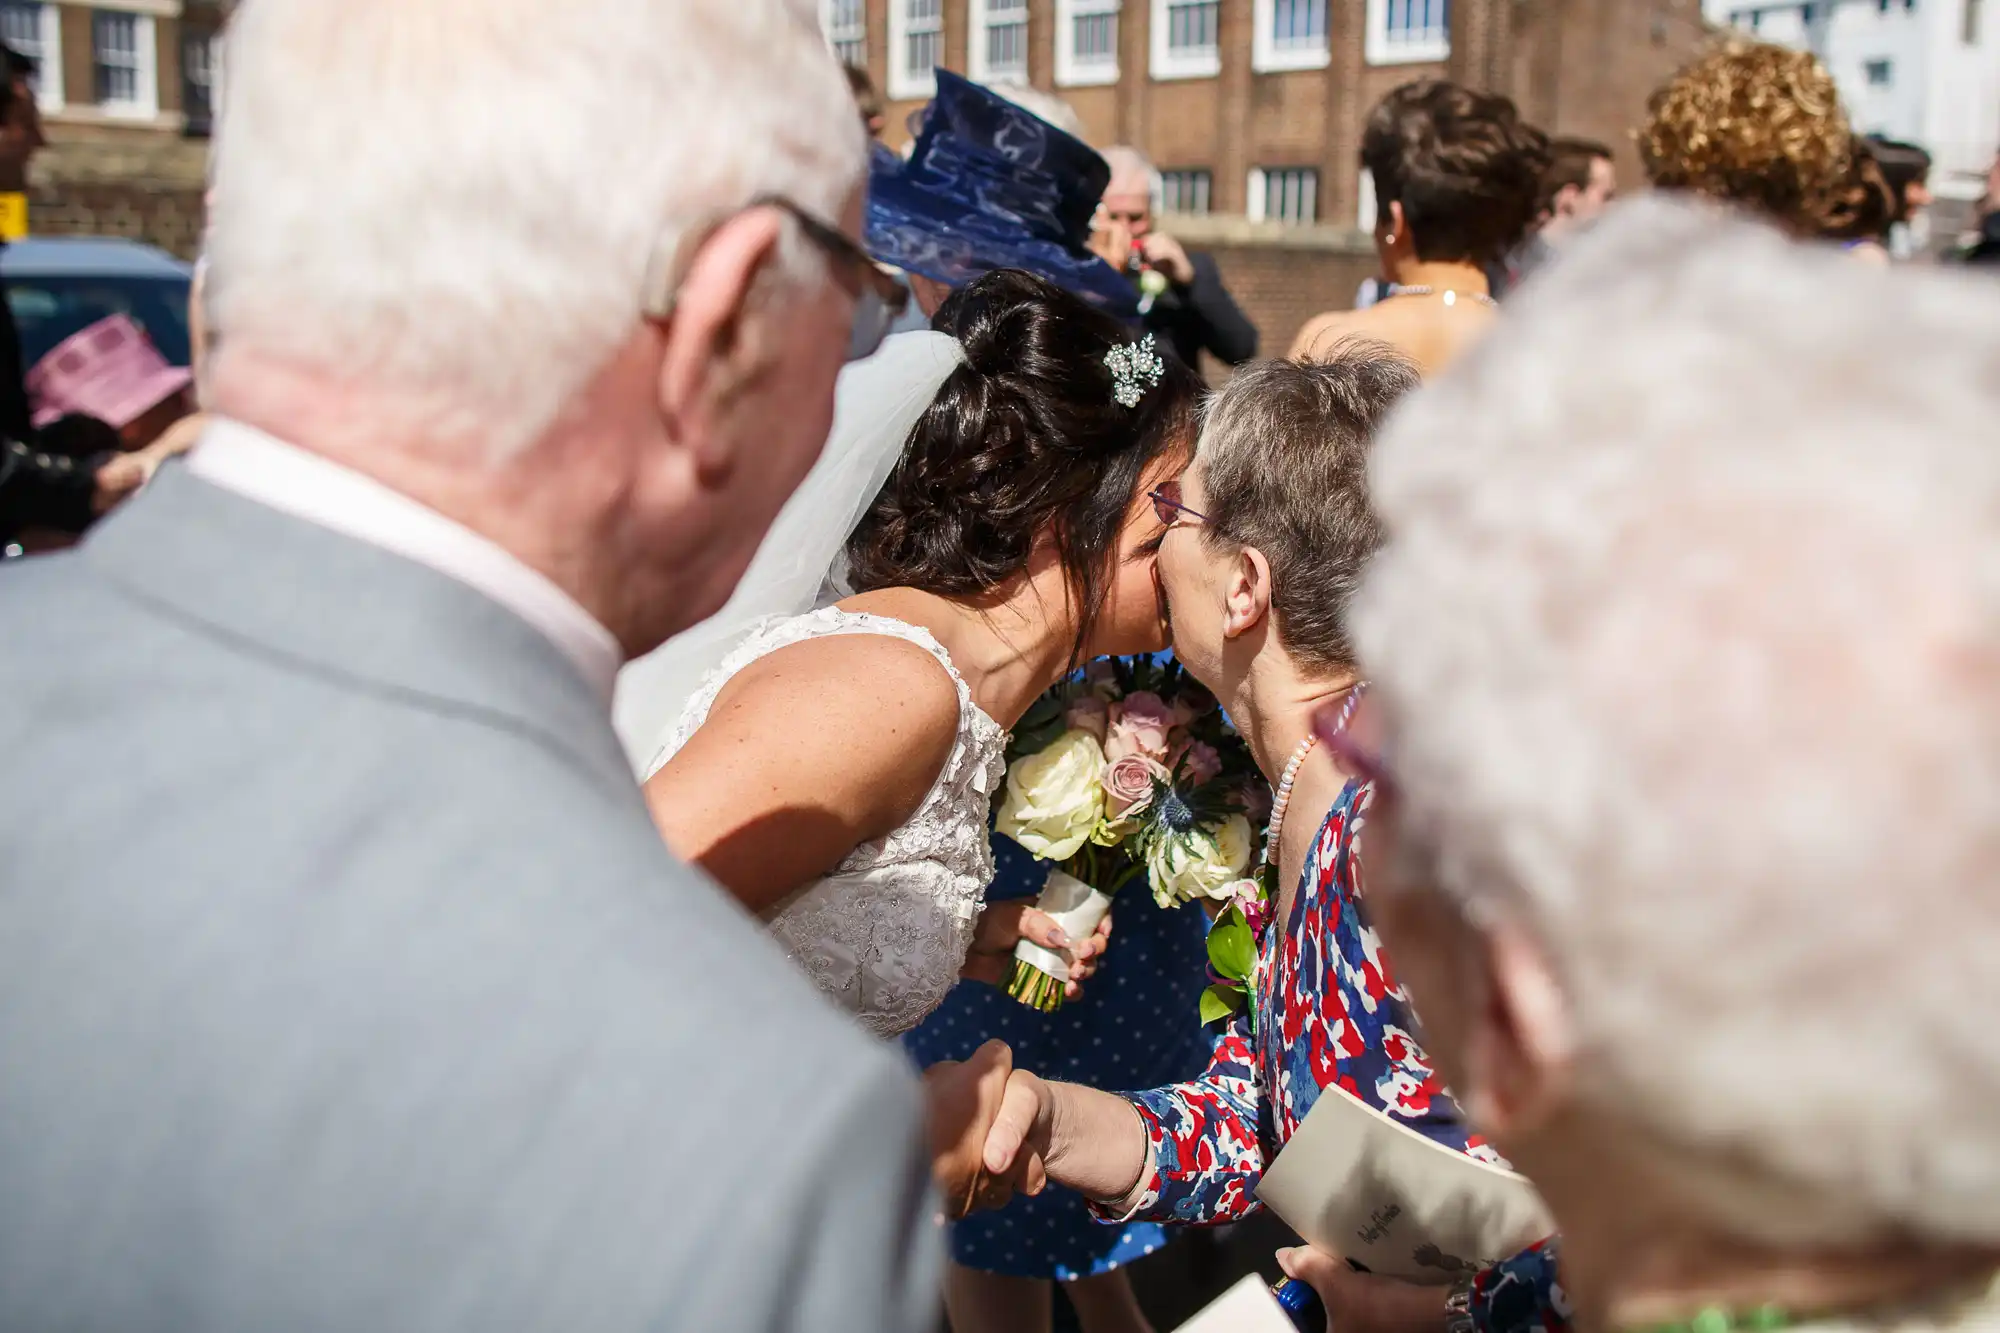 Bride in a white dress kissing an elderly woman's cheek outside; guests in formal attire surround them.